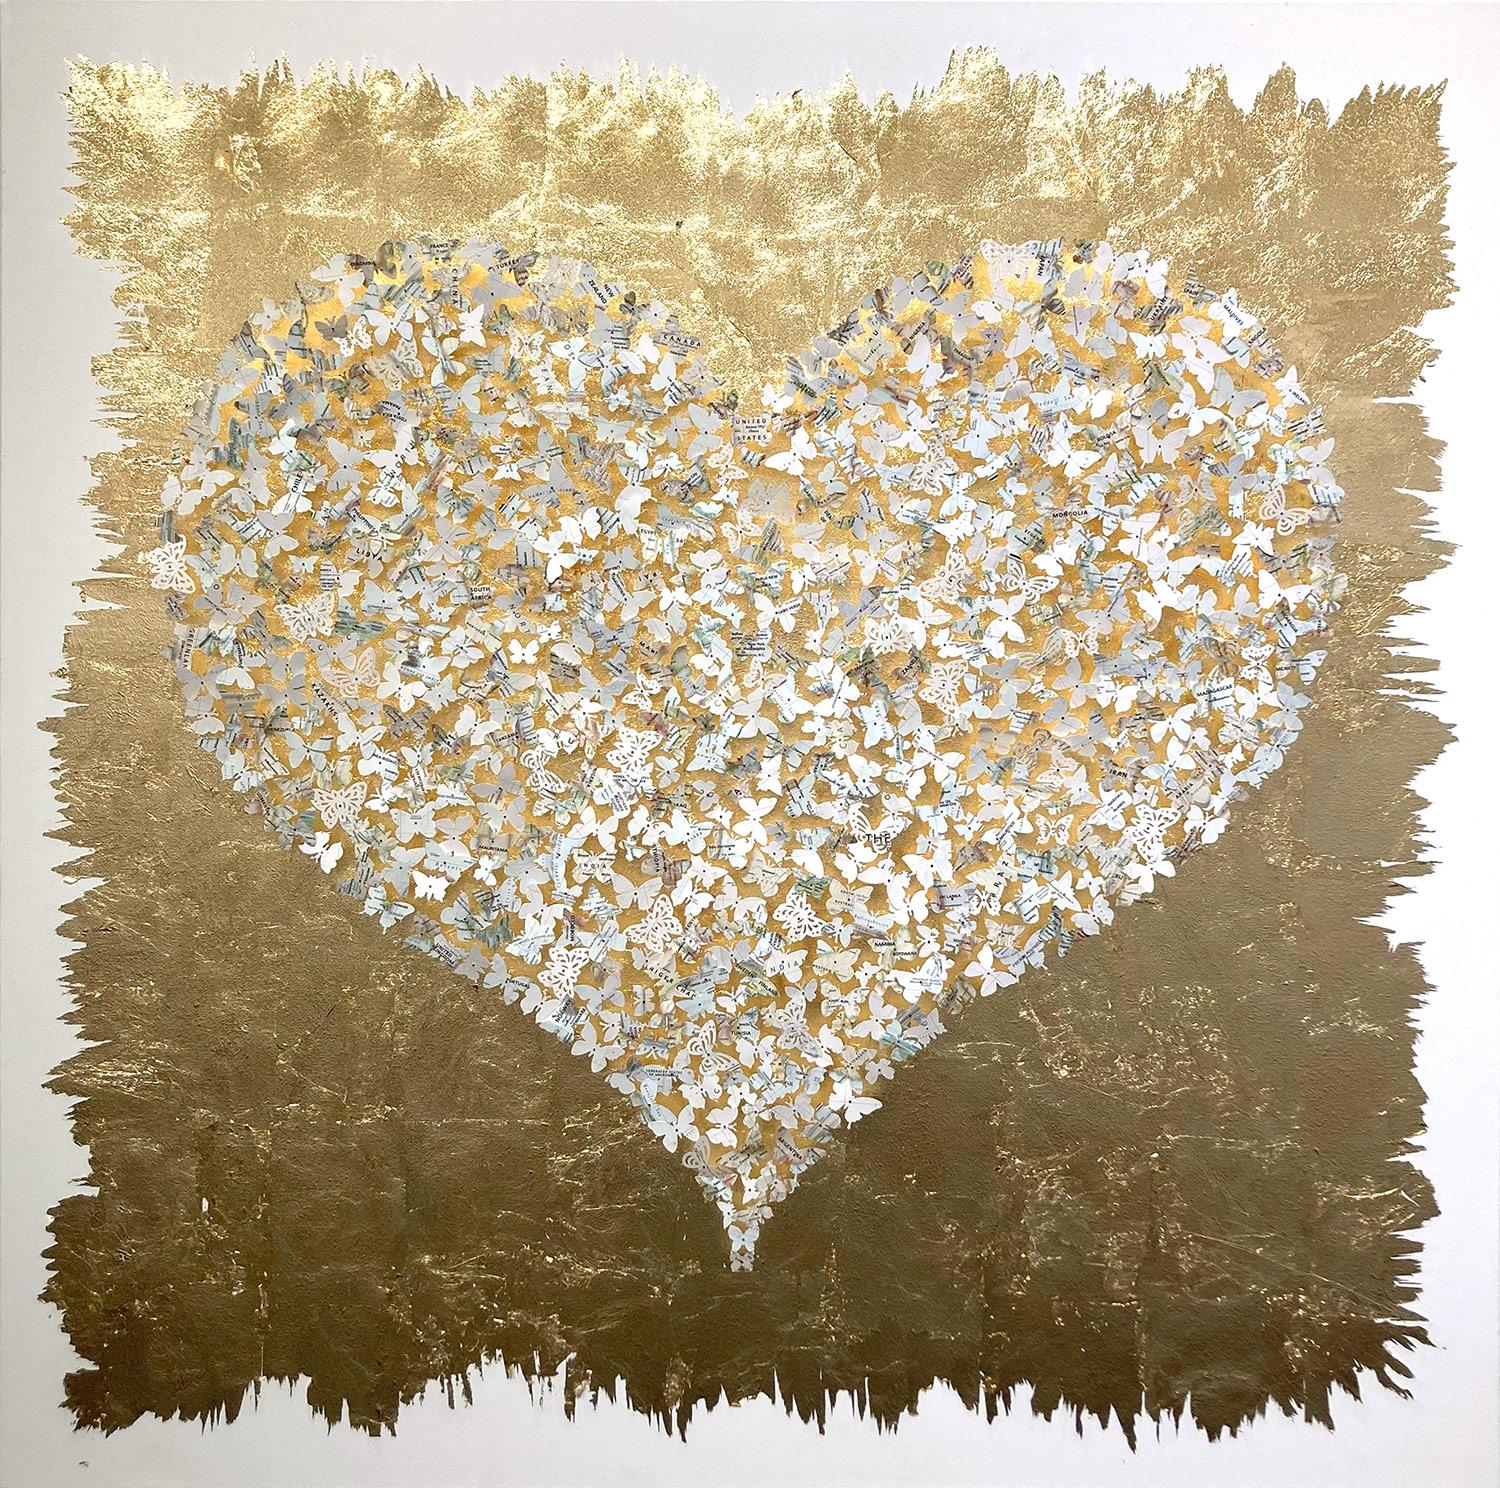 Laila Jalallar Abstract Painting - "Come Together - Gold Leaf Heart" Paper Maps Butterflies Painting on Canvas